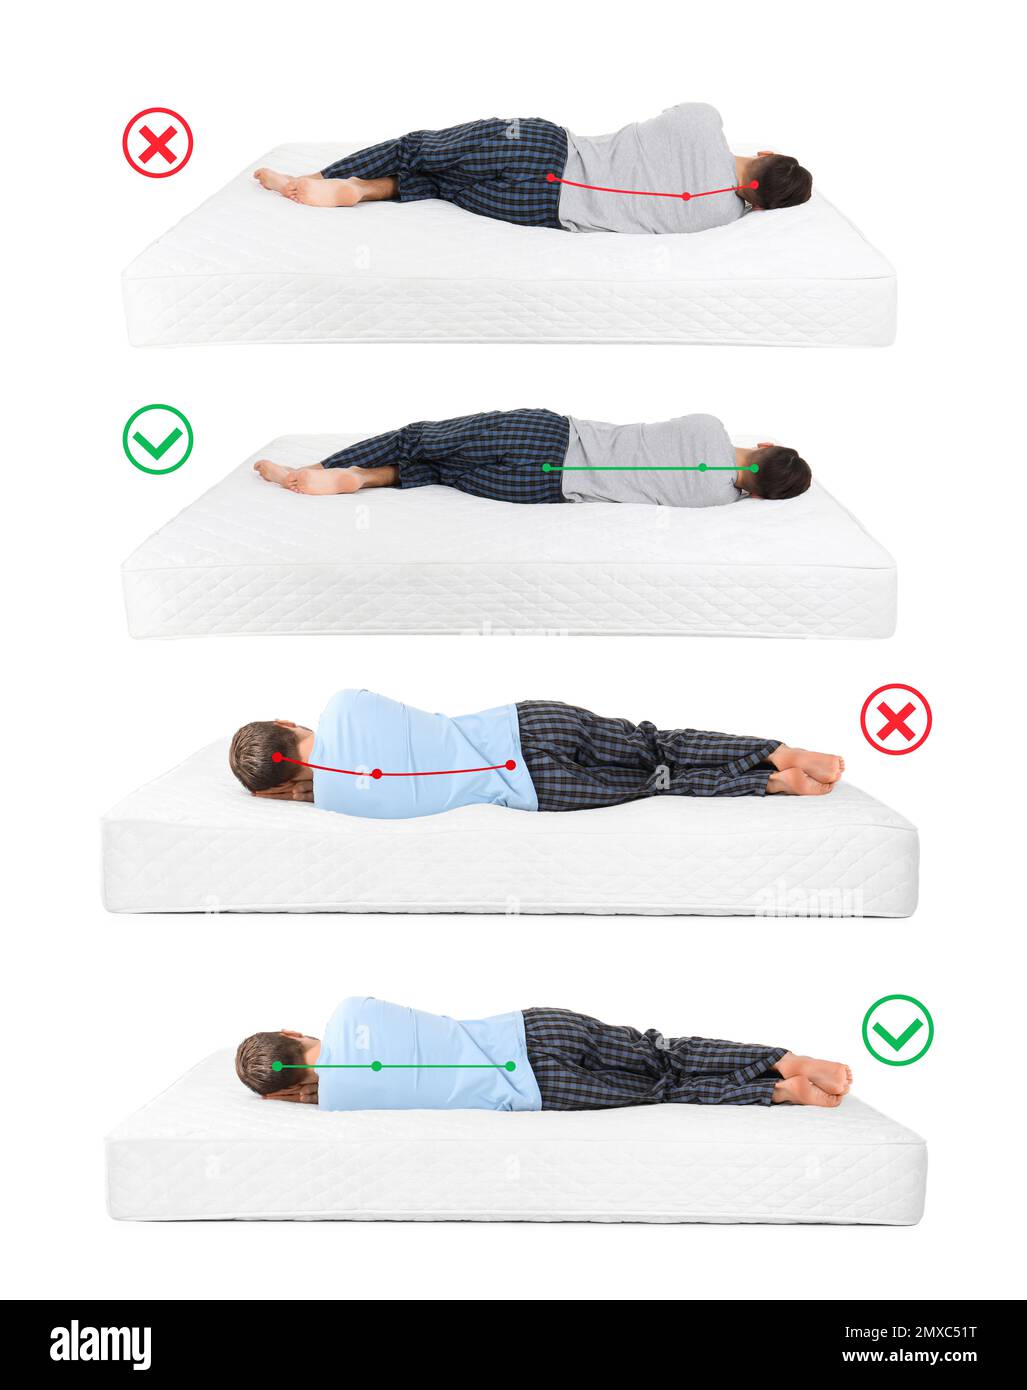 https://c8.alamy.com/comp/2MXC51T/wrong-and-correct-sleeping-posture-choose-right-mattress-2MXC51T.jpg